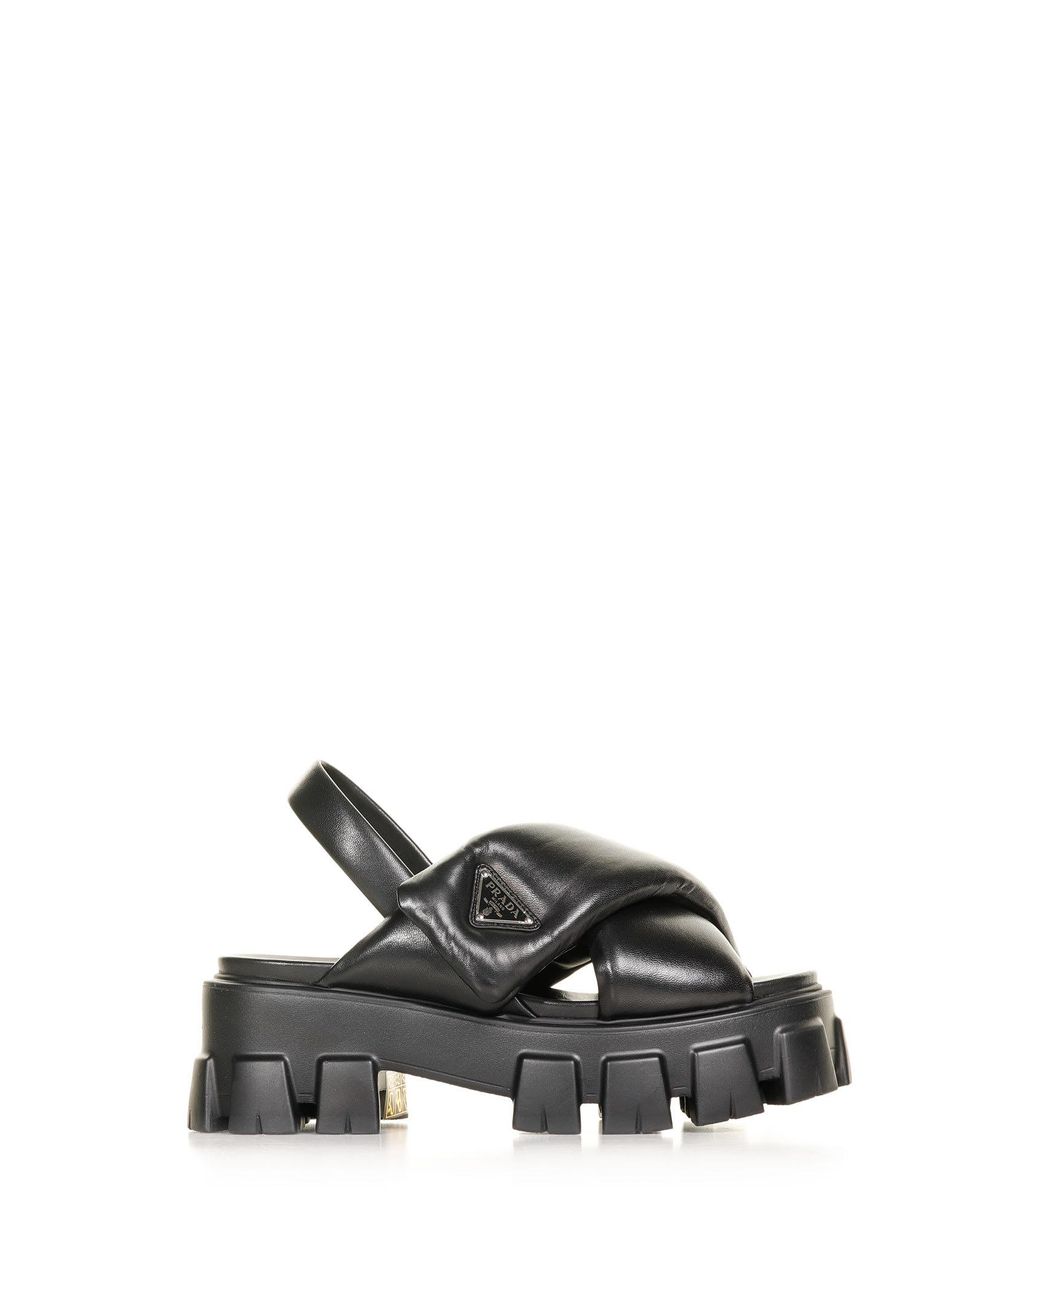 Prada Monolith Sandals In Padded Nappa Leather in Black | Lyst